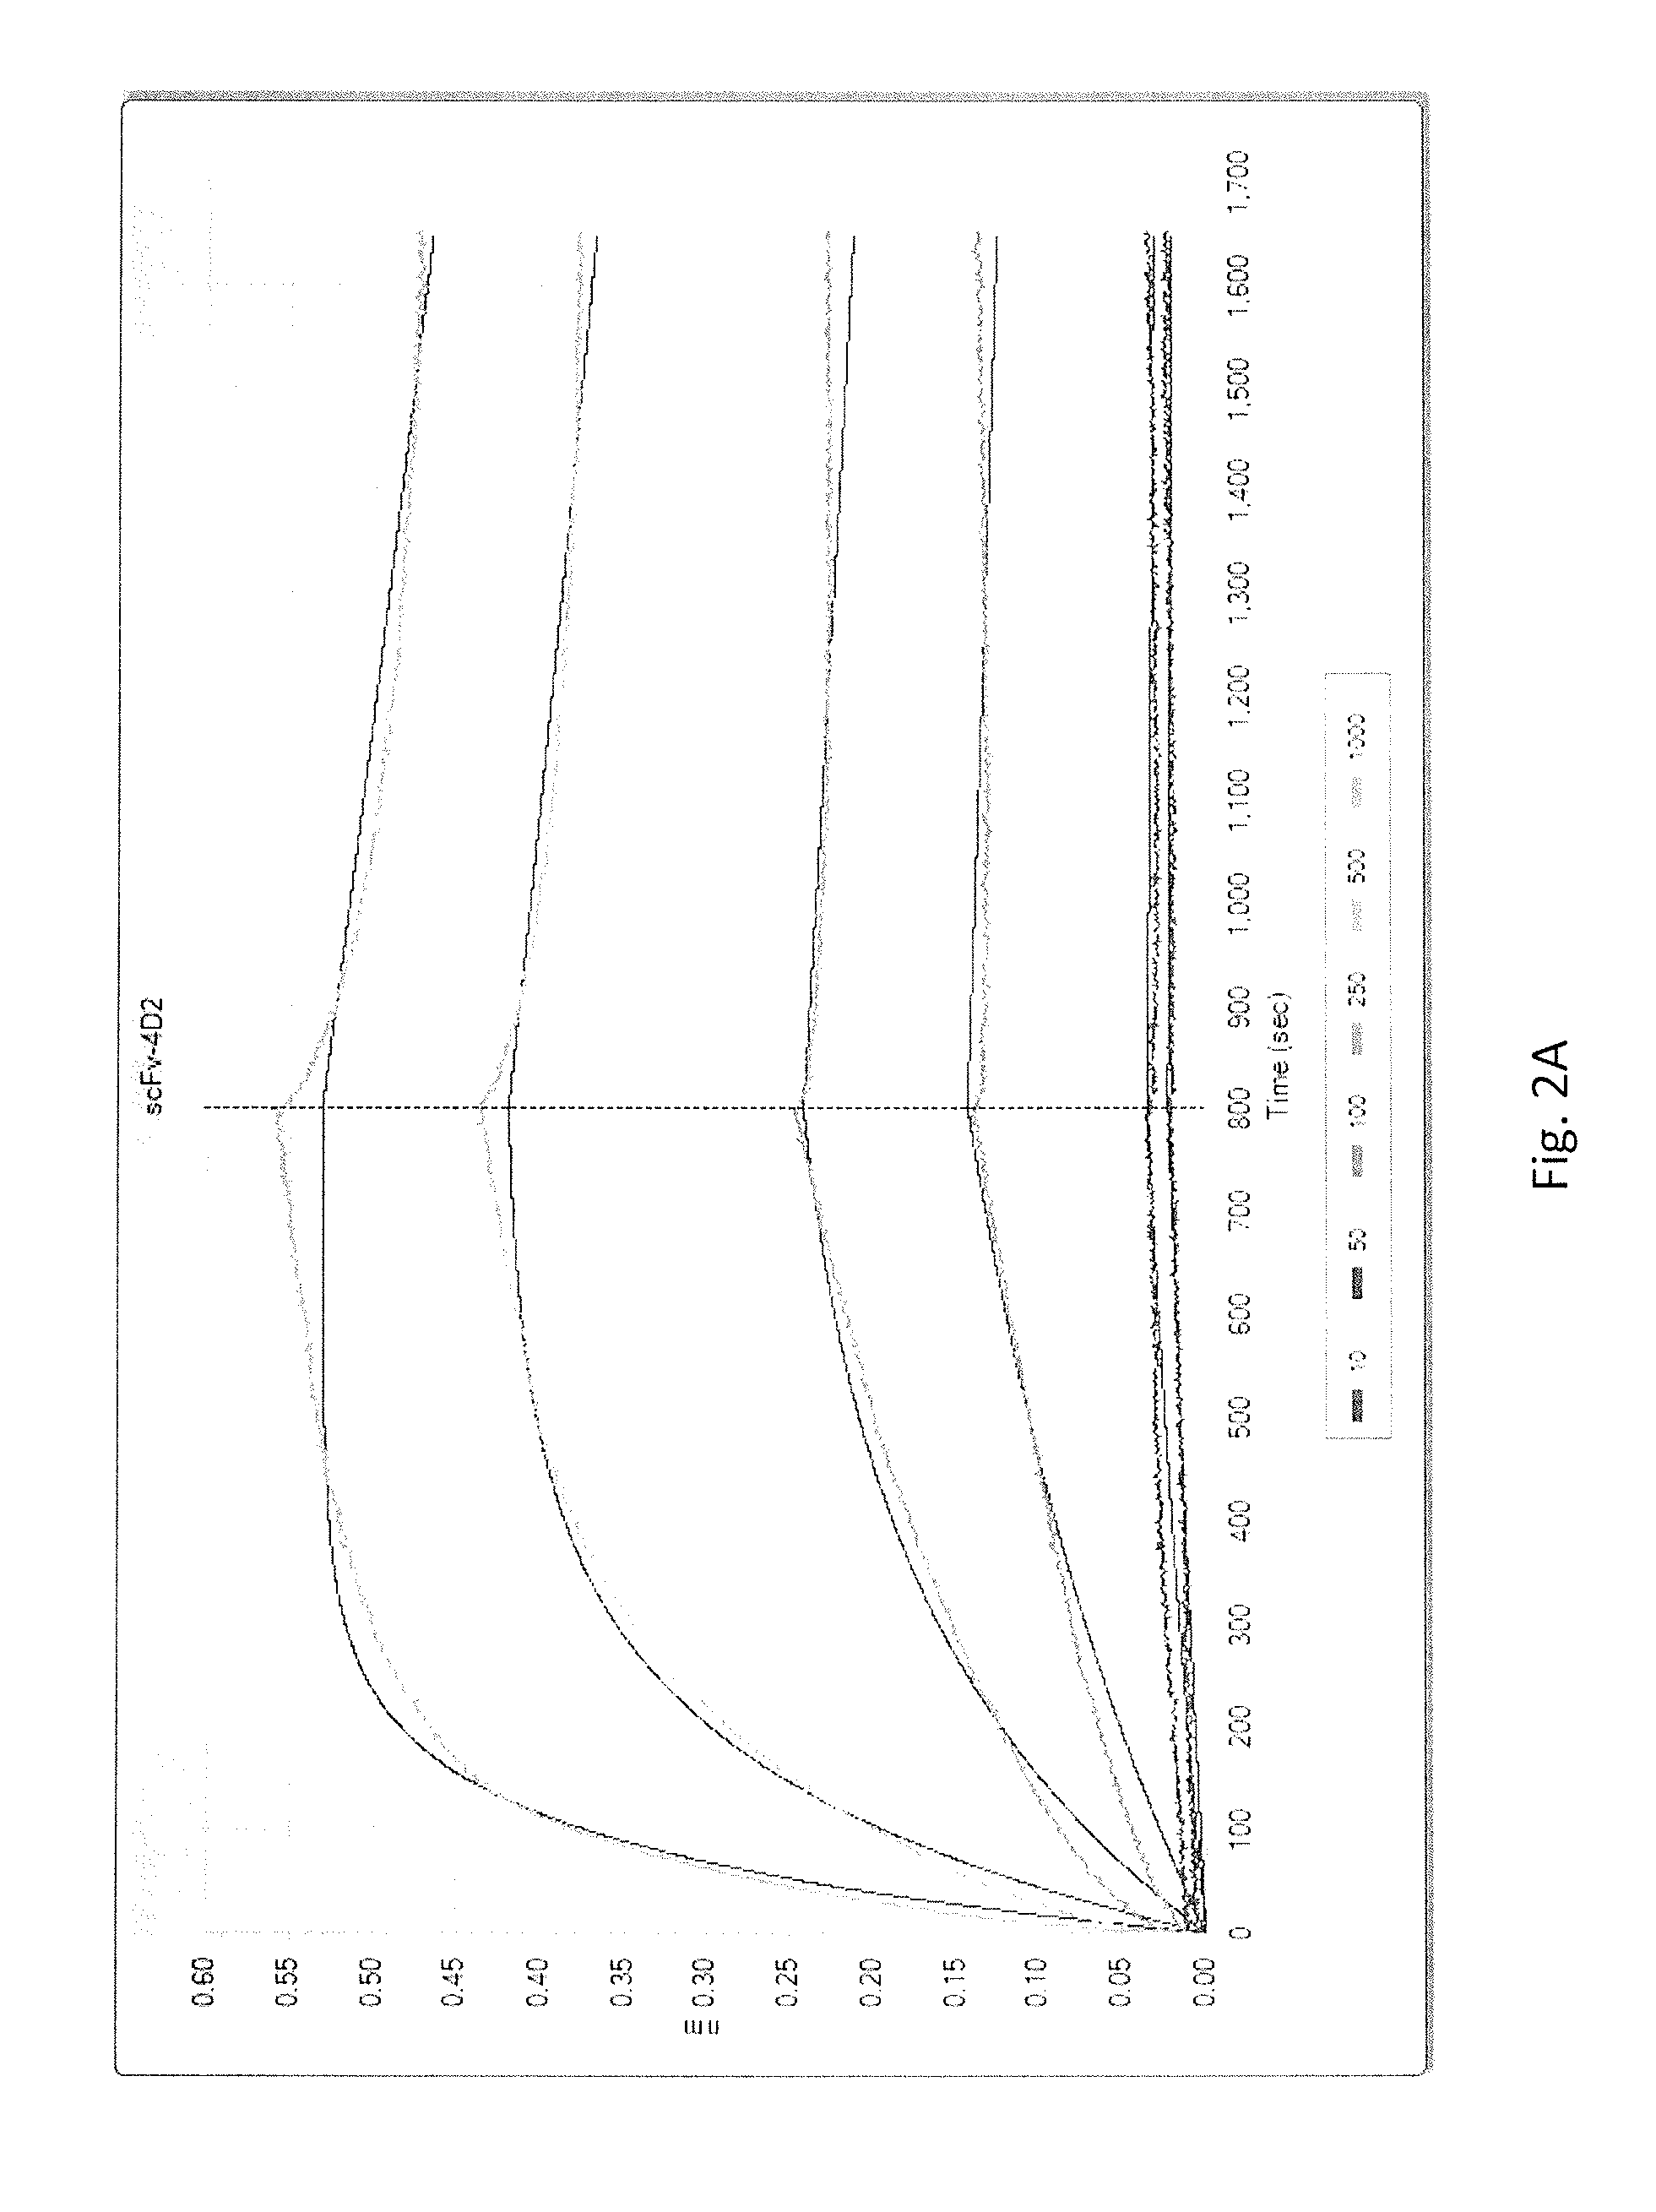 Antibodies that specifically bind to serum albumin without interfering with albumin's capability to interact with the fcrn